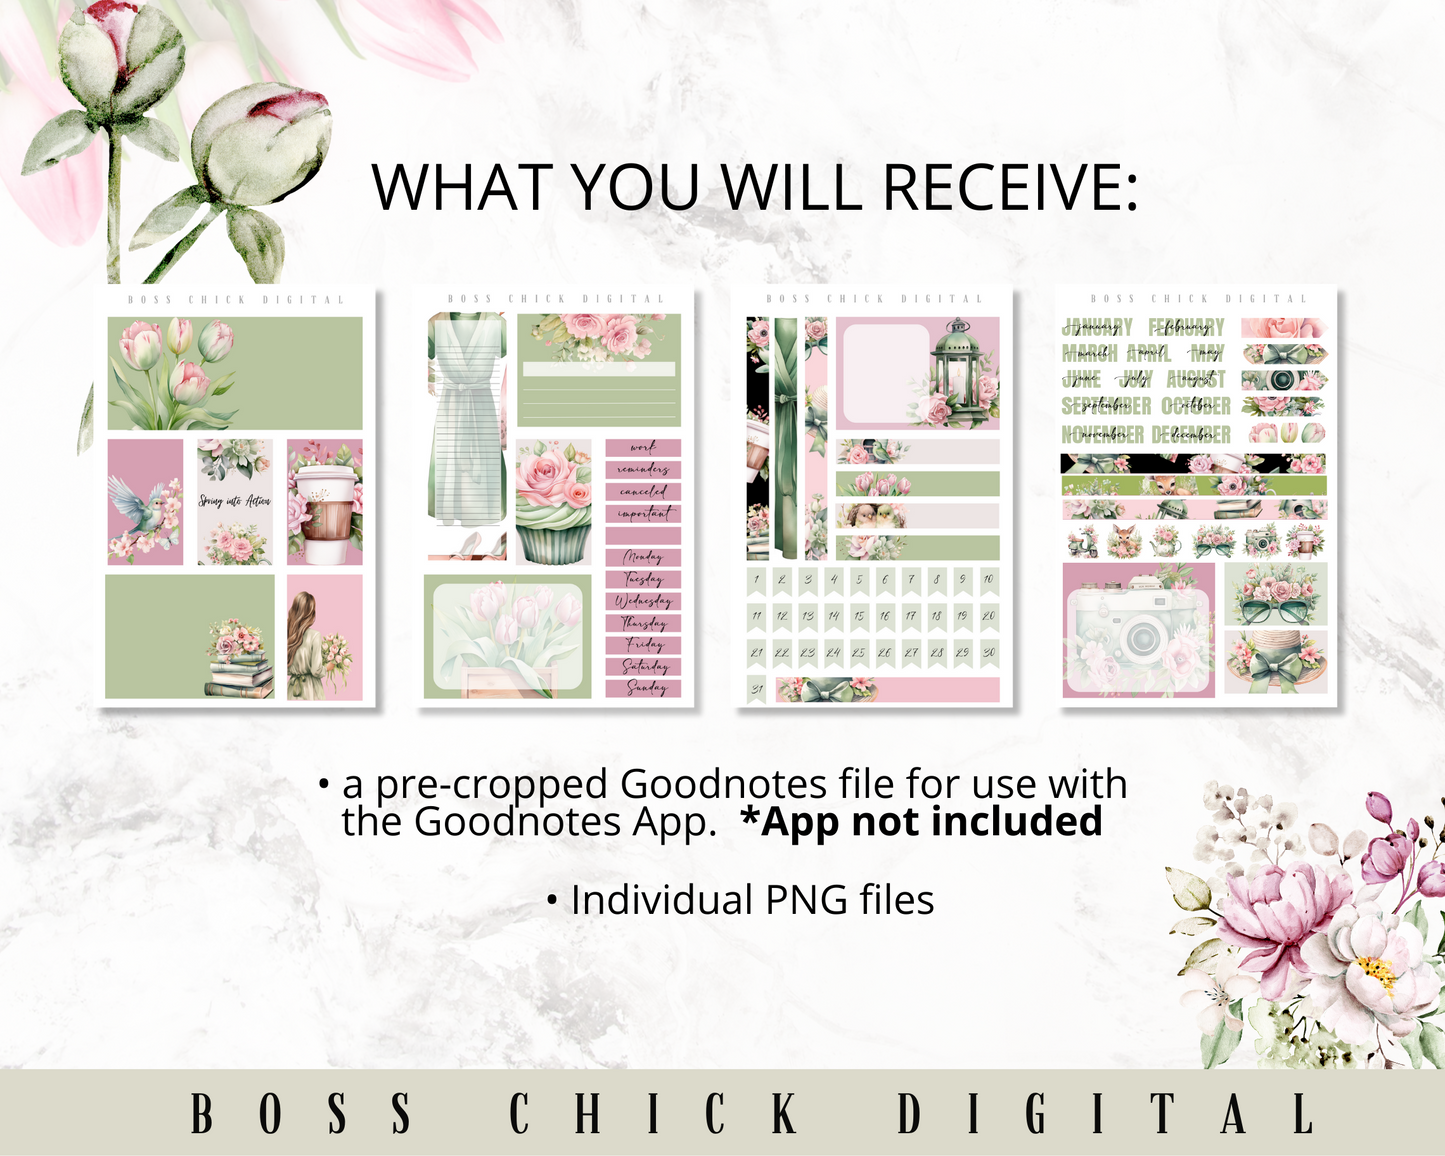 Digital Planner Stickers Monthly Digital Sticker Kit | Digital Pre-Cropped Goodnotes File Digital Stickers | PNG's Included- Spring Into Action